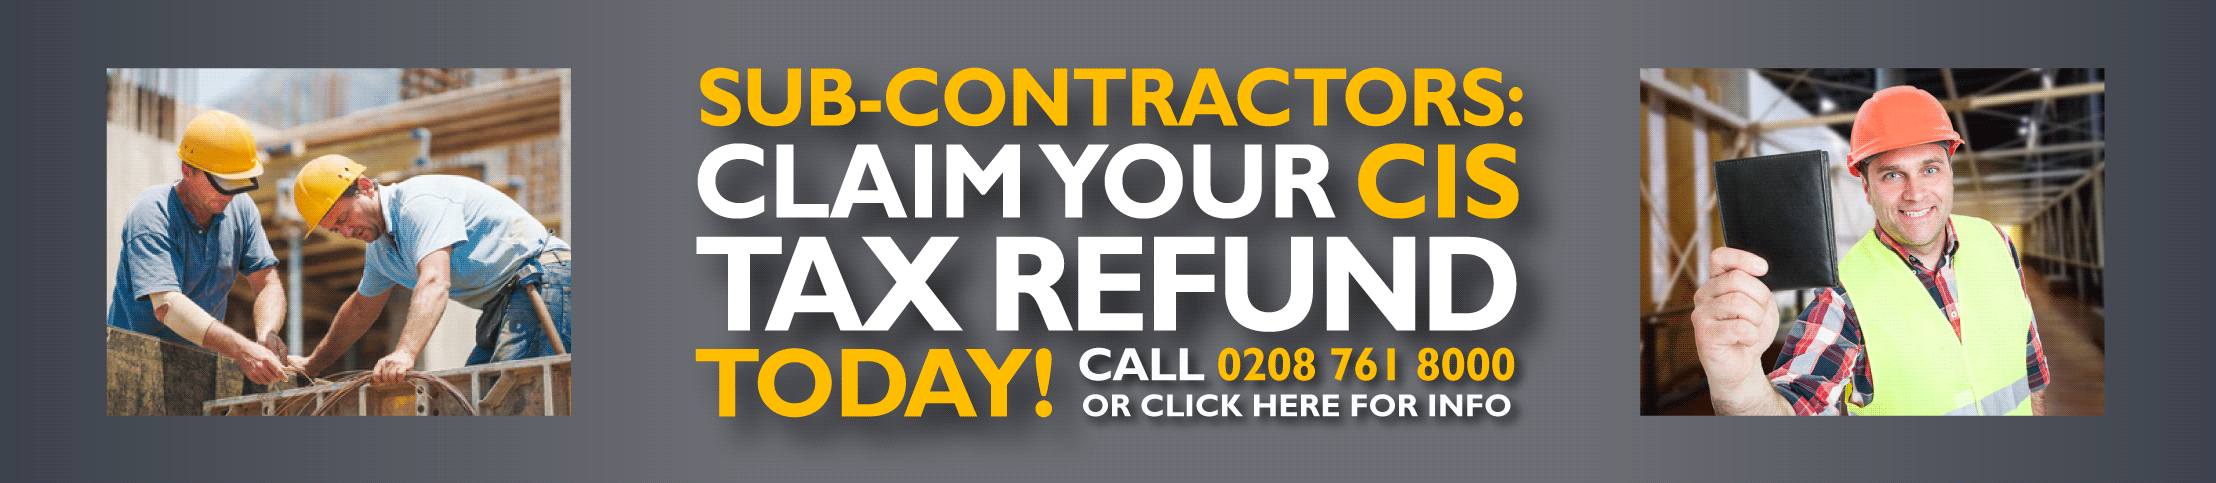 Subcontractor? Claim your CIS tax refund!